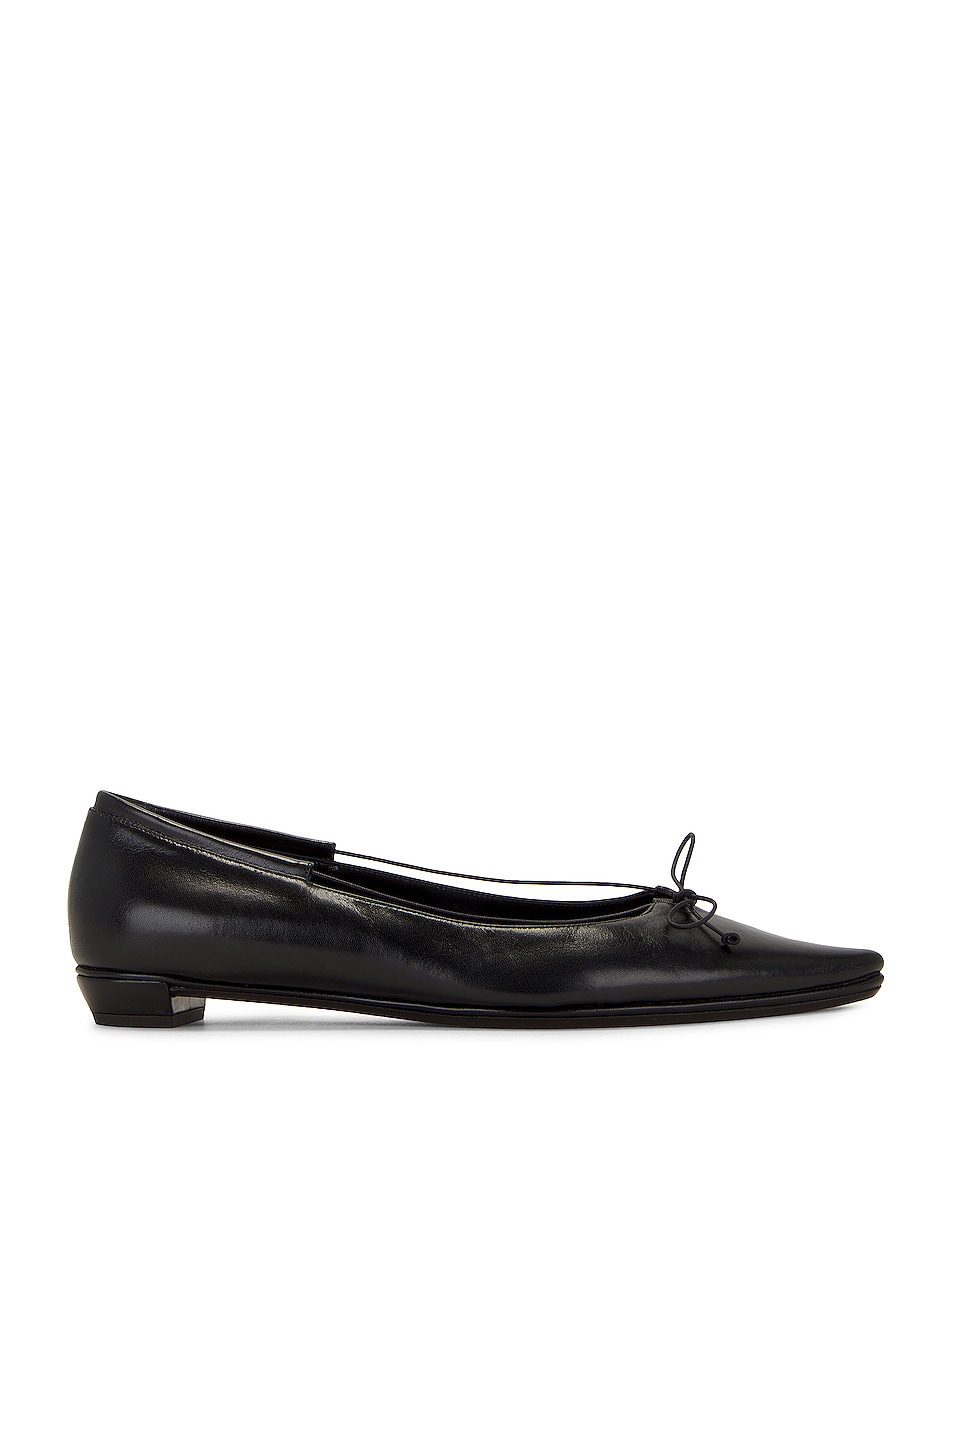 Image 1 of The Row Claudette Bow Flat in Black